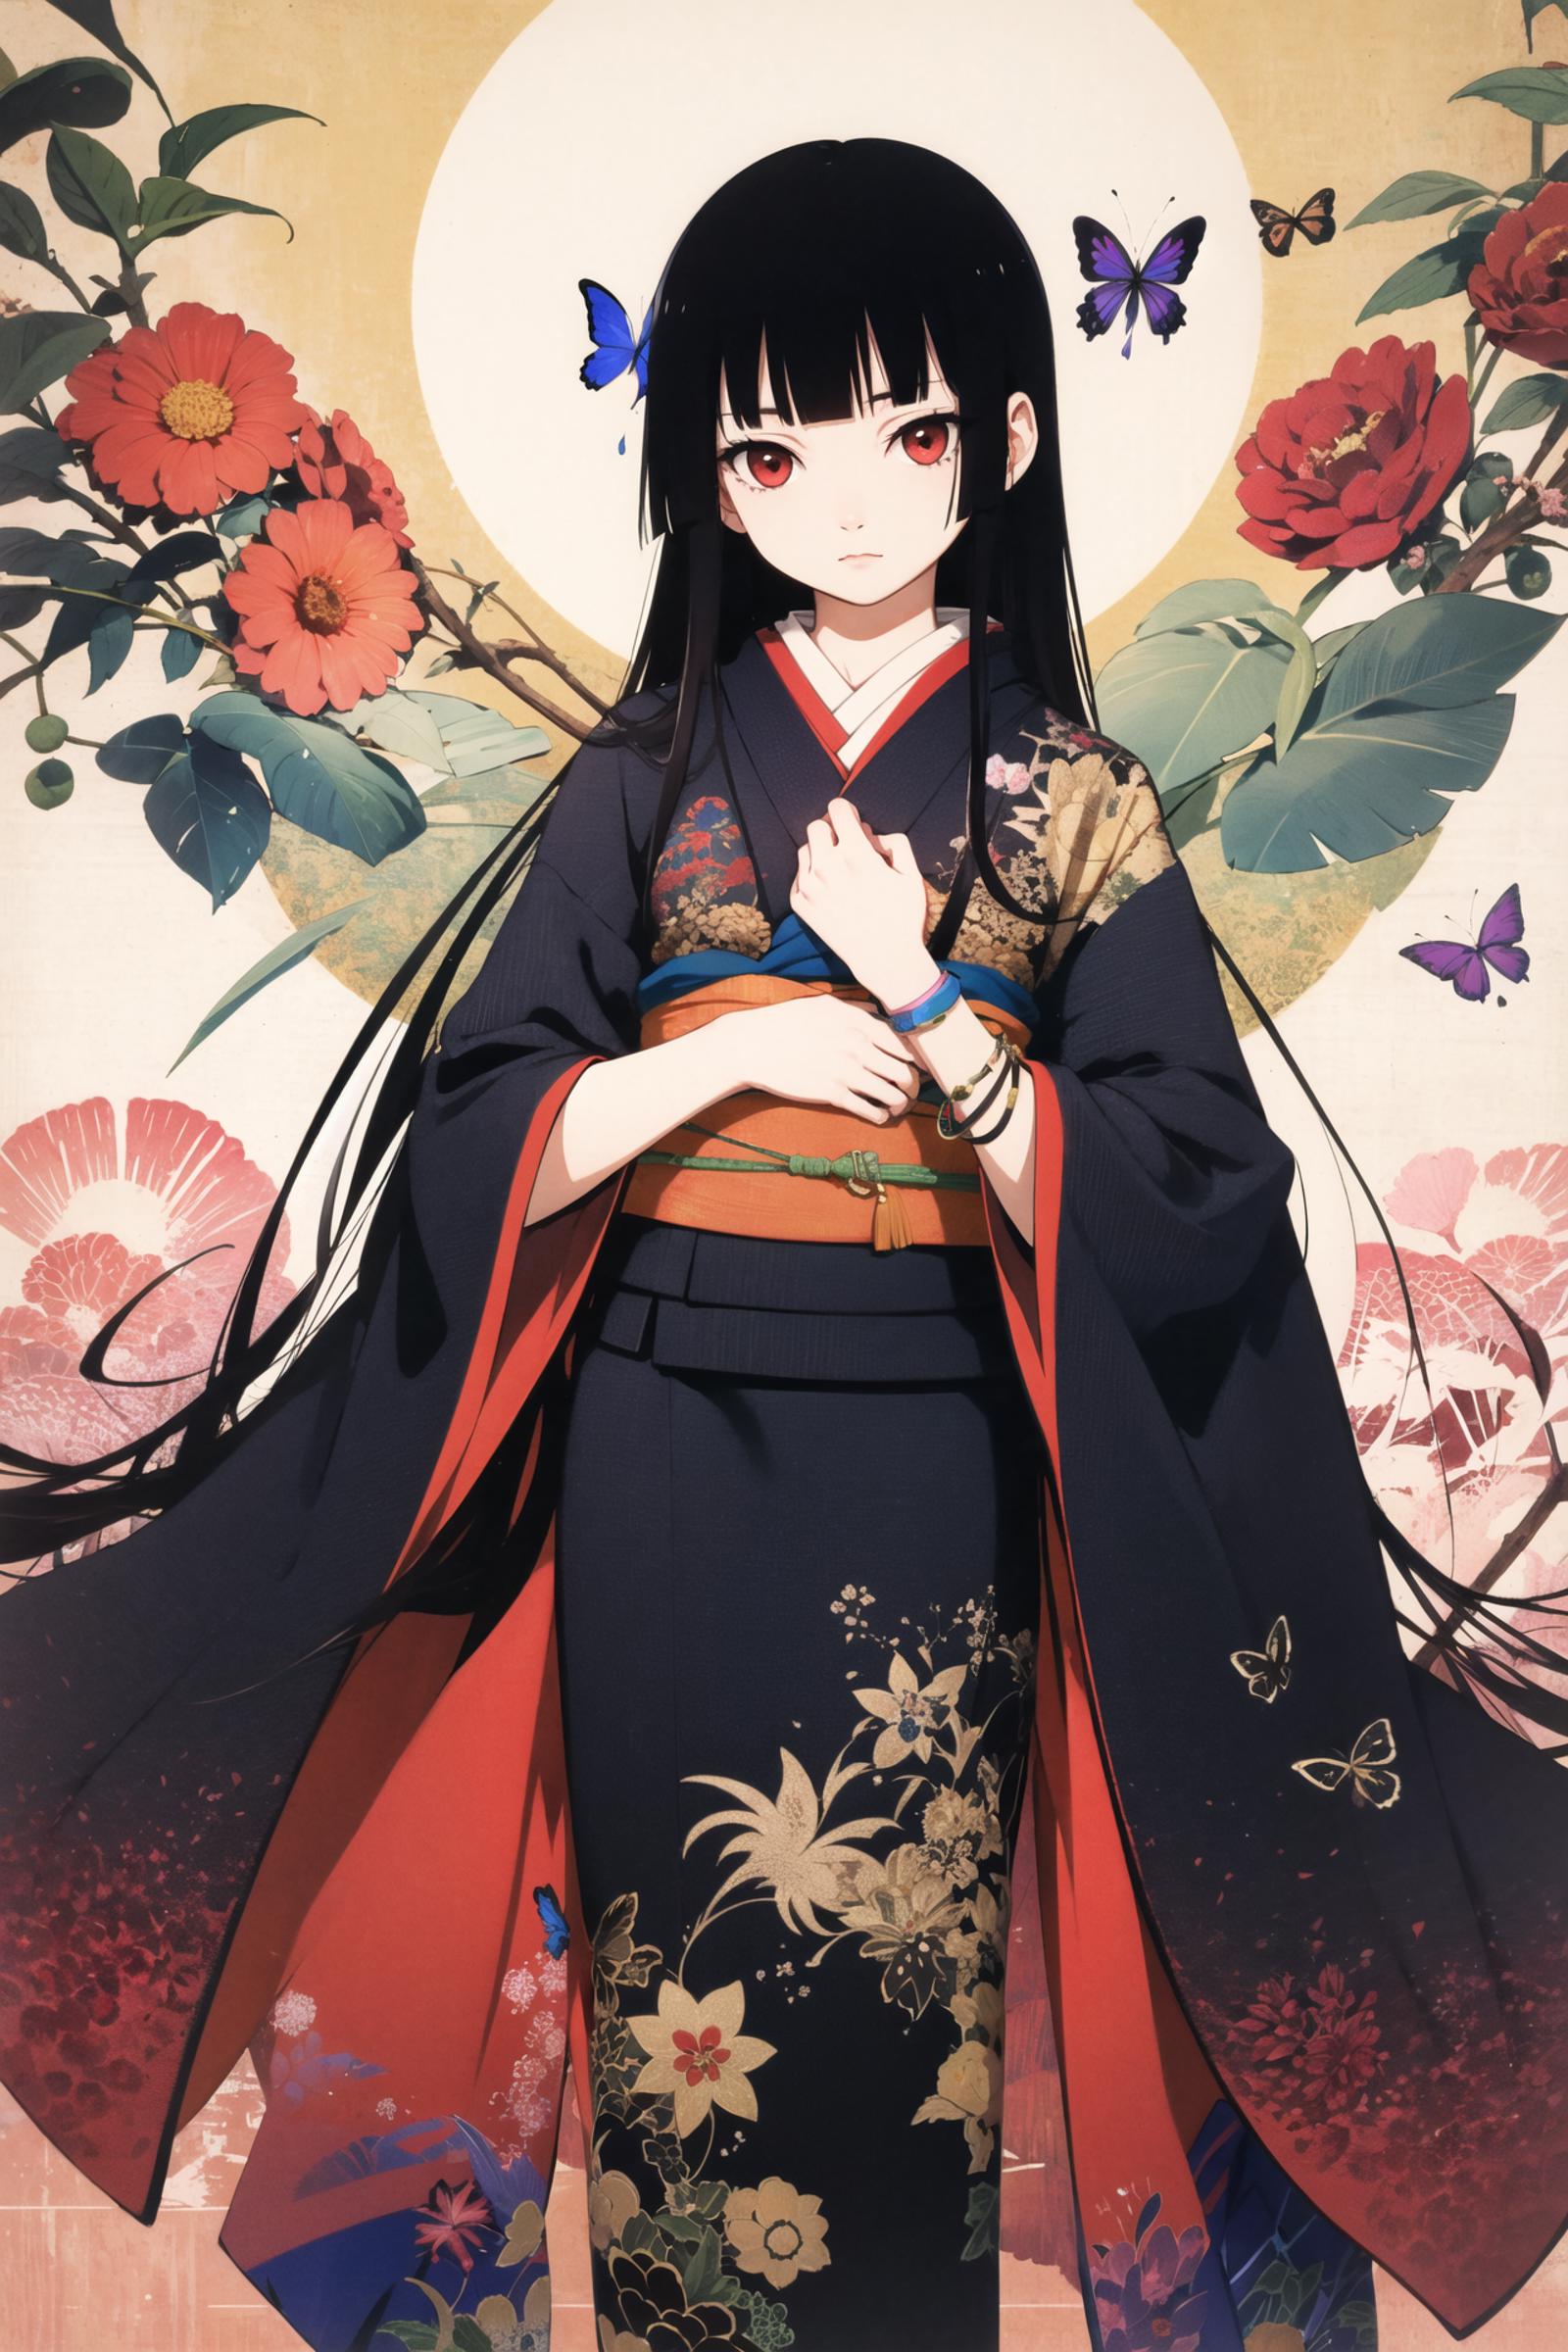 A Japanese girl wearing traditional clothing, surrounded by flowers and butterflies.